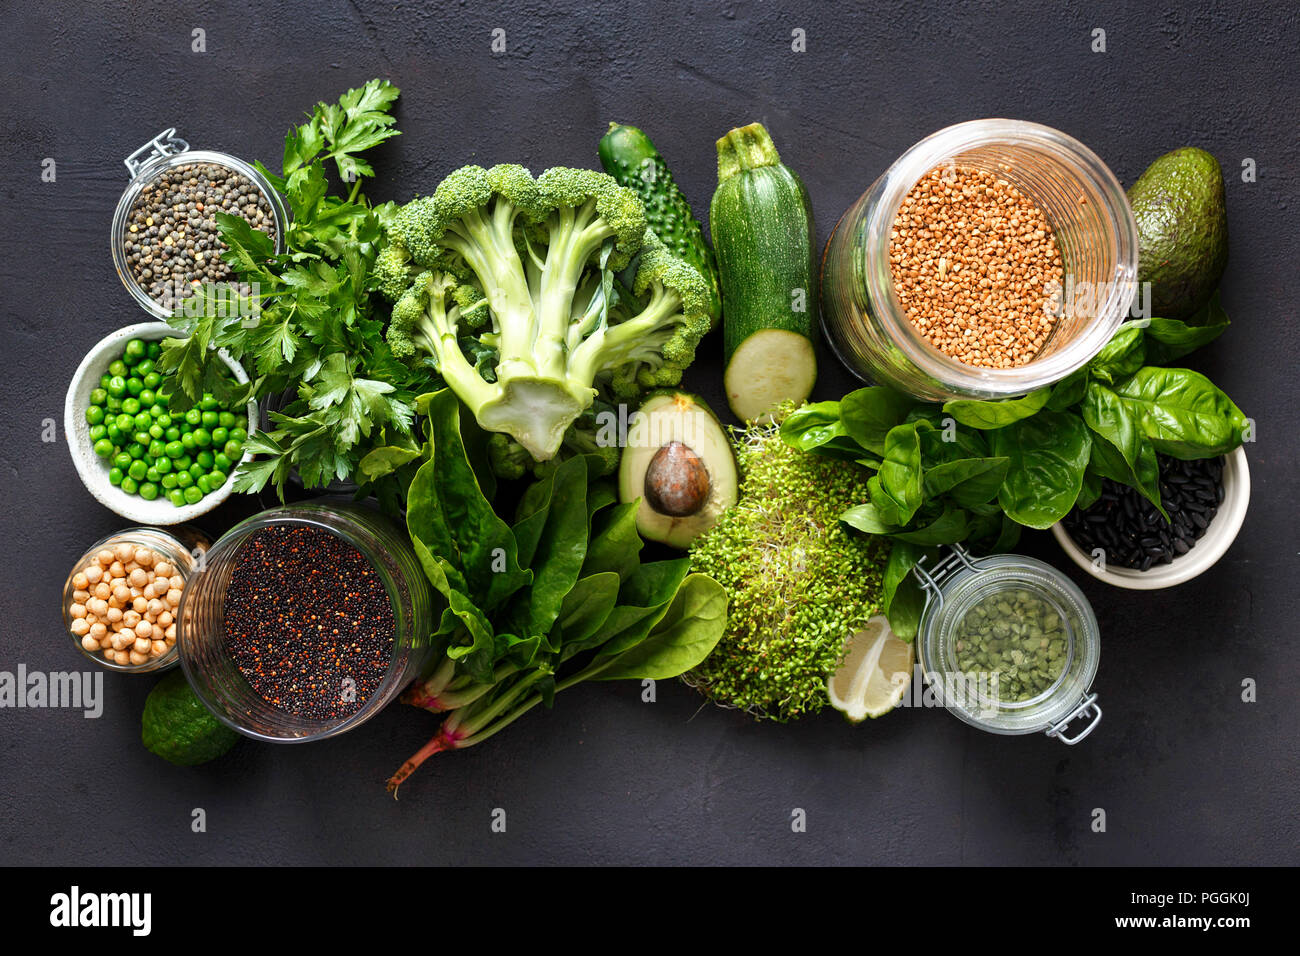 Raw healthy food clean eating vegetables and grain products: green vegetables, quinoa, chickpea, beans, buckwheat, green lentils on dark stone backgro Stock Photo